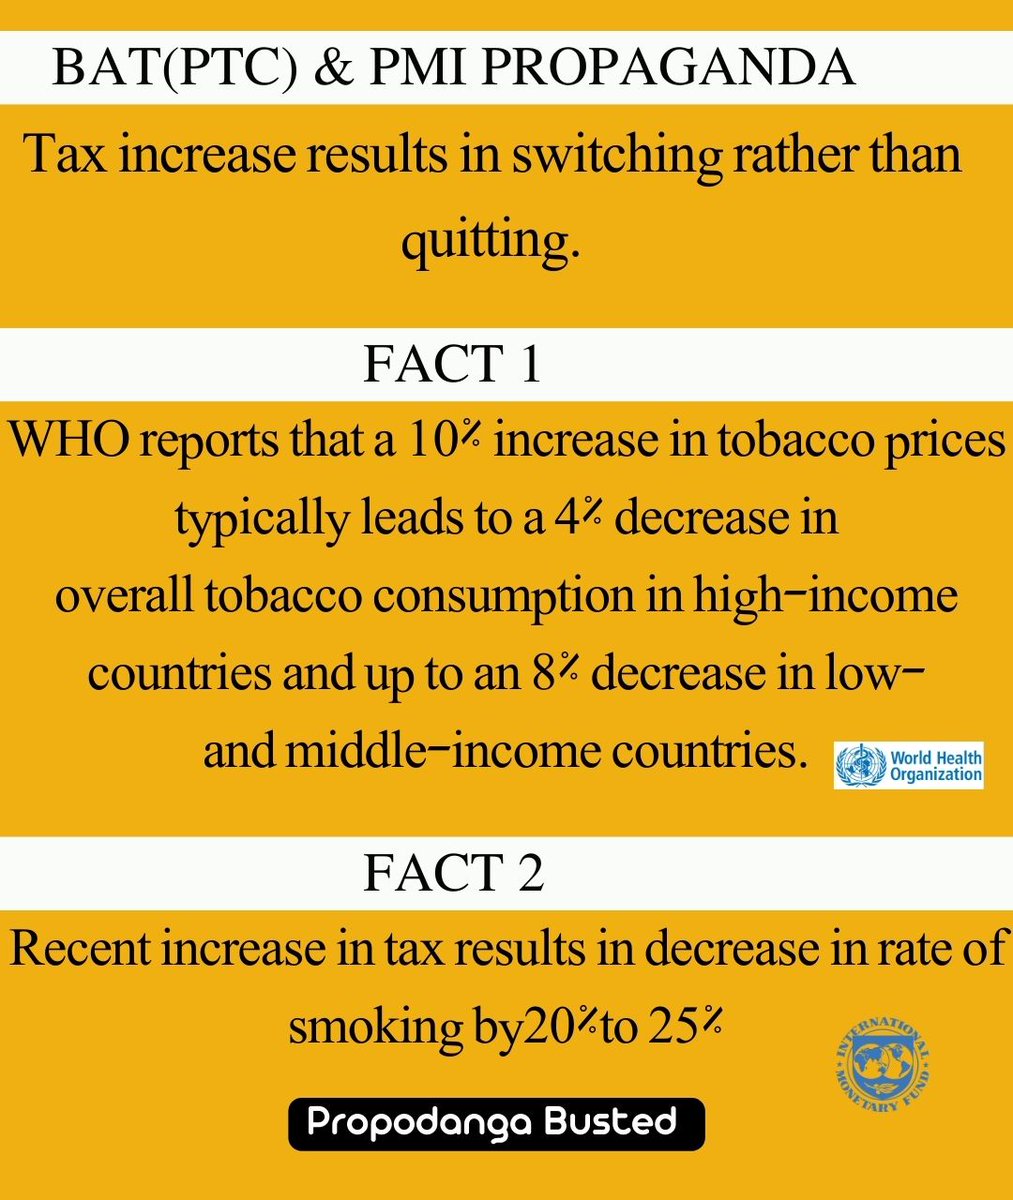 Tobacco control remains a critical issue in Pakistan, with smoking-related illnesses imposing a significant burden on healthcare systems and contributing to preventable deaths. We must prioritize preventive measures to save lives. #PakLoss567Billions
@FBRSpokesperson